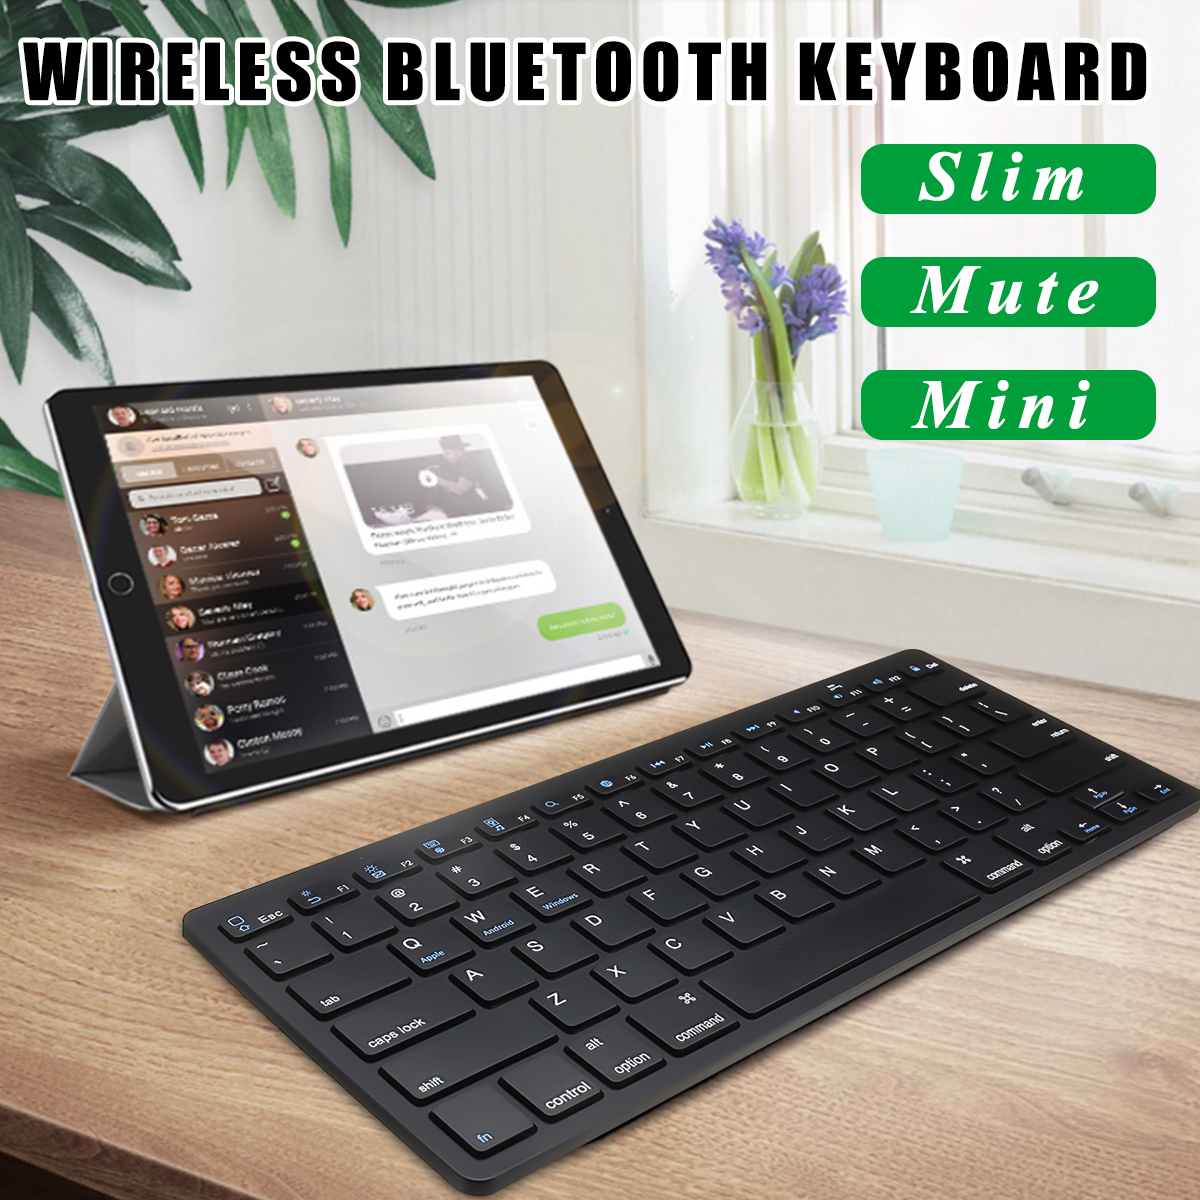 Wirelss bluetooth 3.0 Keyboard For iPhone iPad Macbook Samsung Tablet PC iOS Android Devices 10